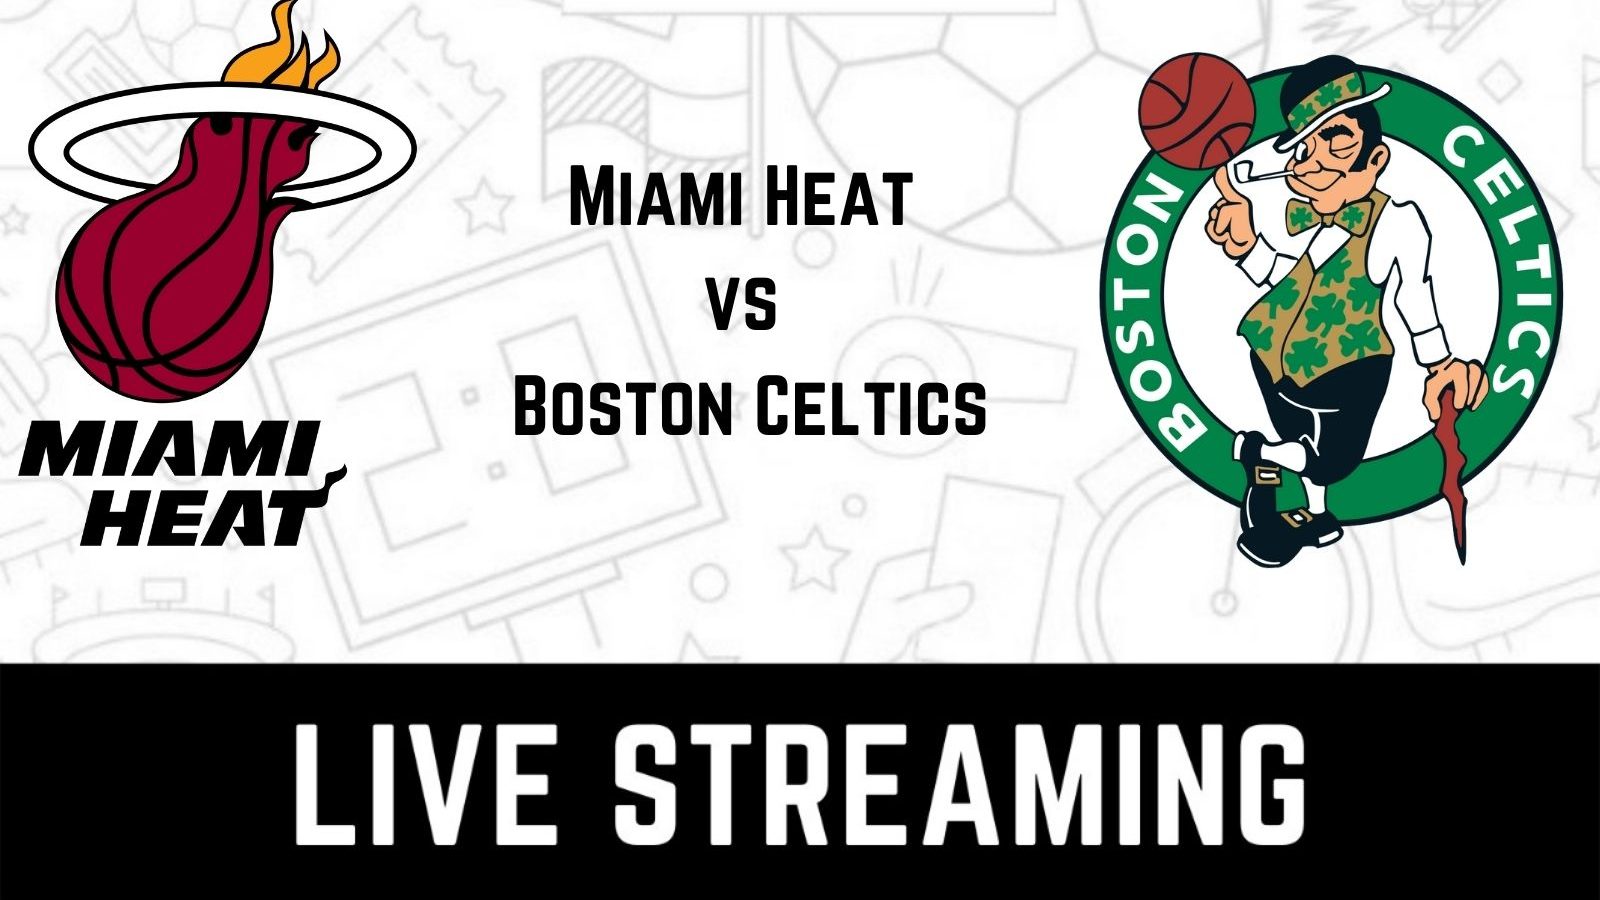 Live stream of the match between Miami Heat and Boston Celtics match in